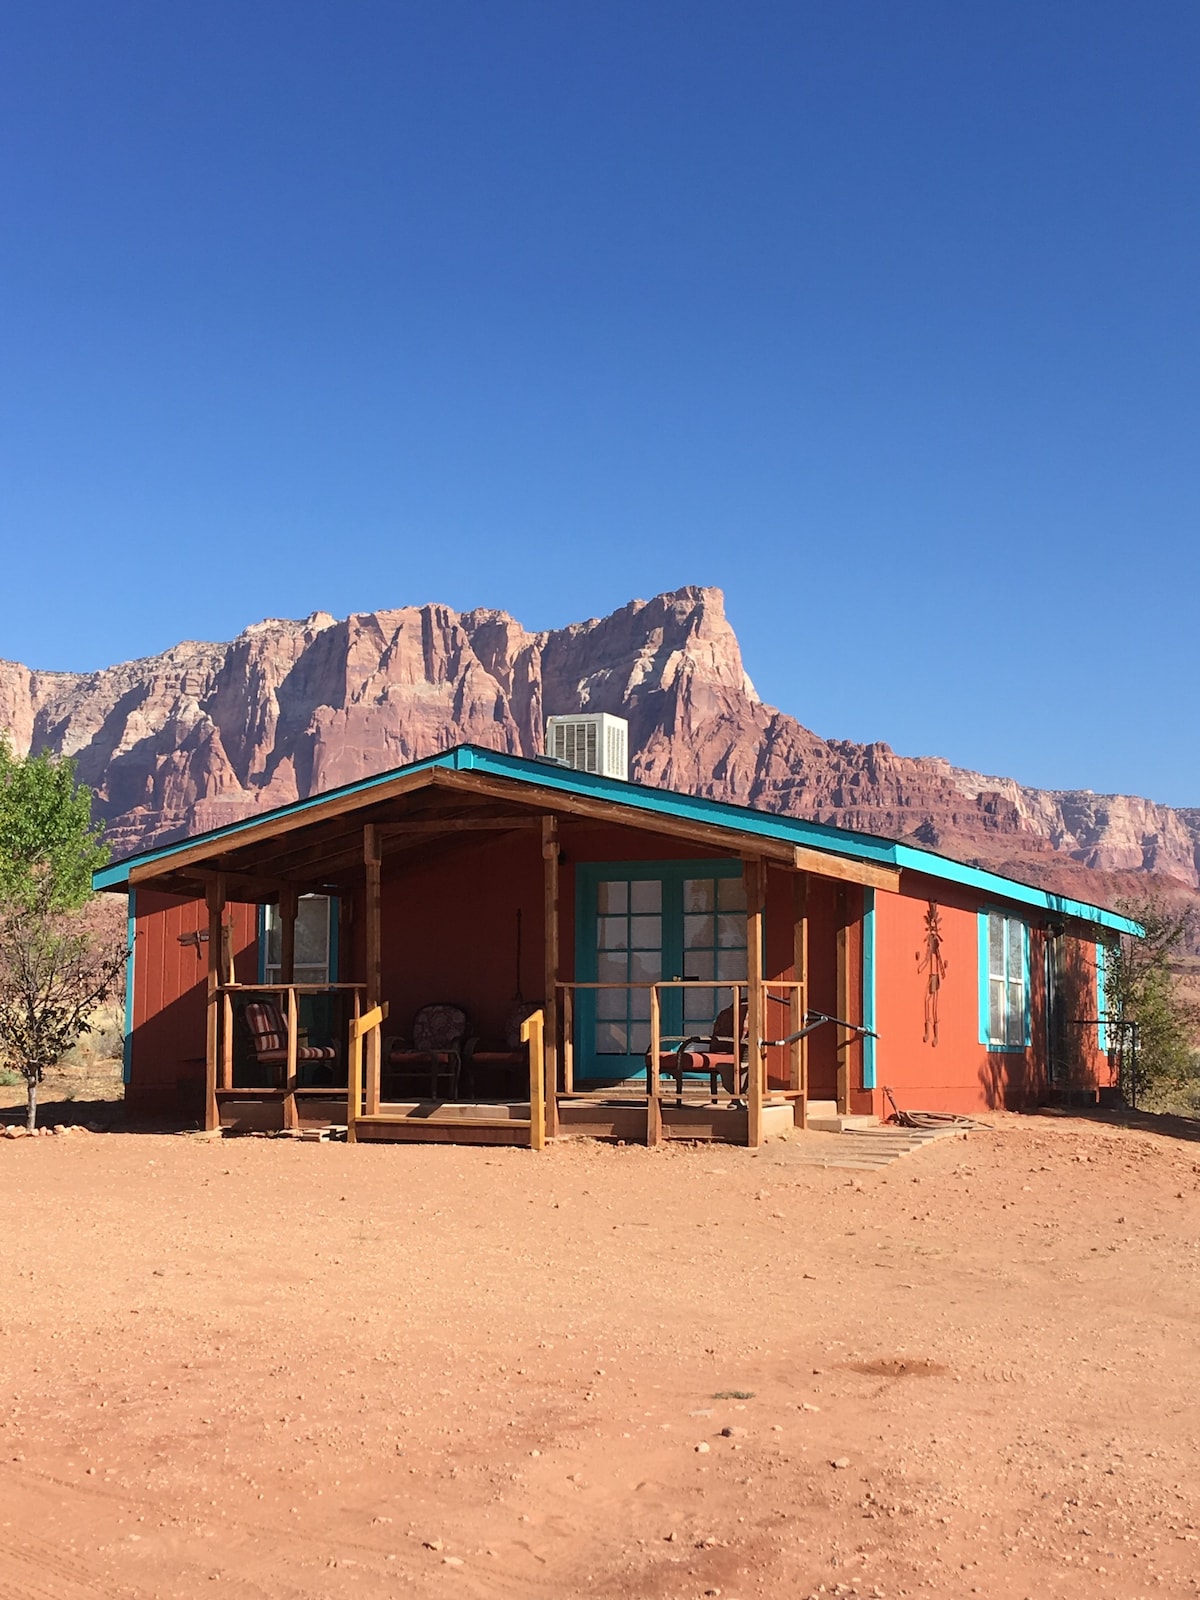 The Hopi House - Peaceful Outpost Nr Colorado River